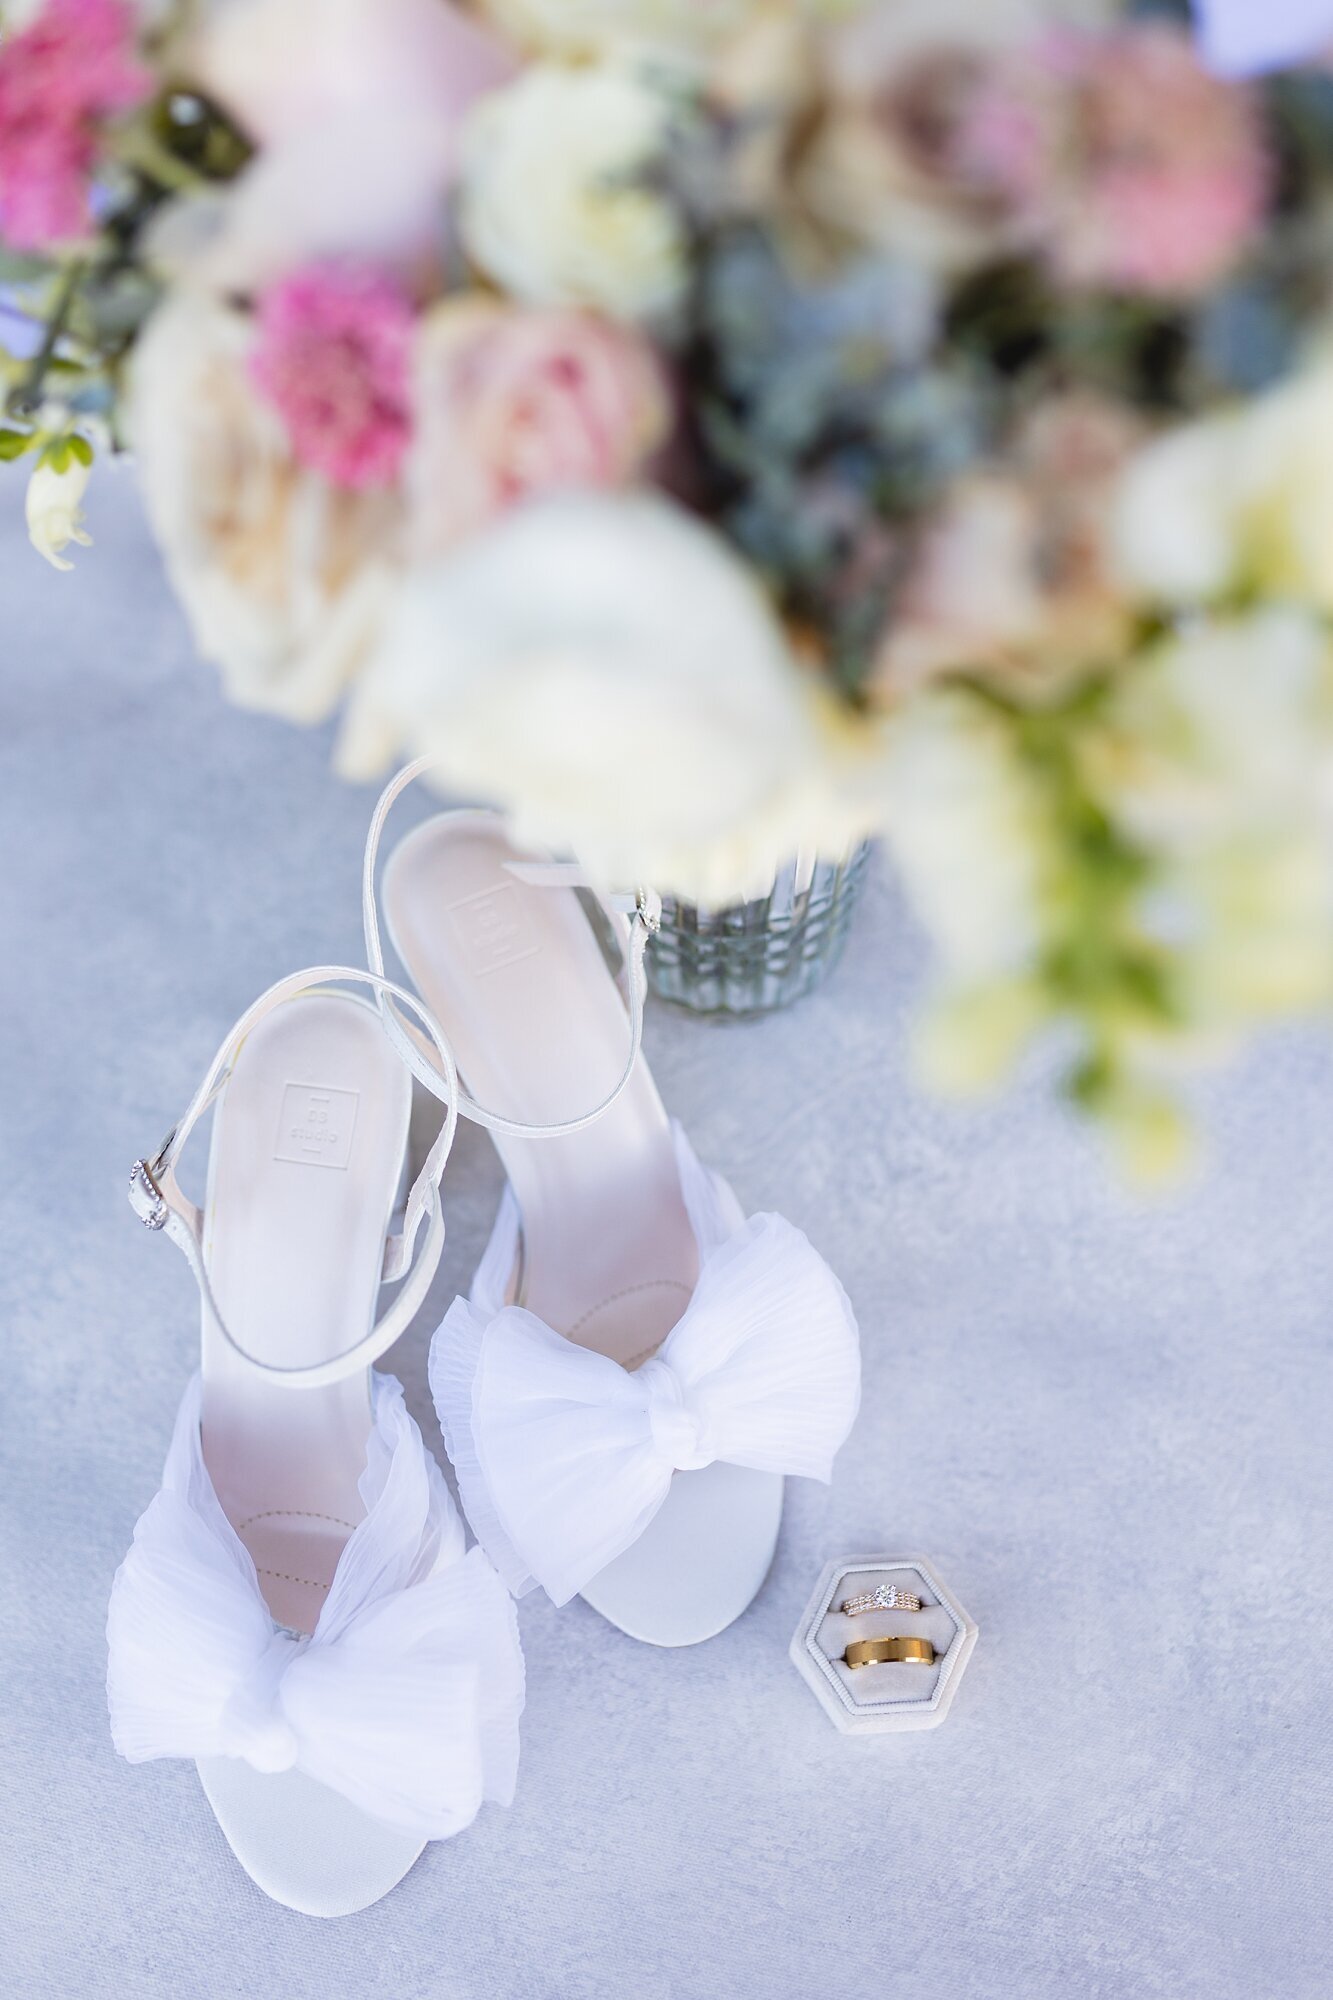 brides shoes, flowers, and rings